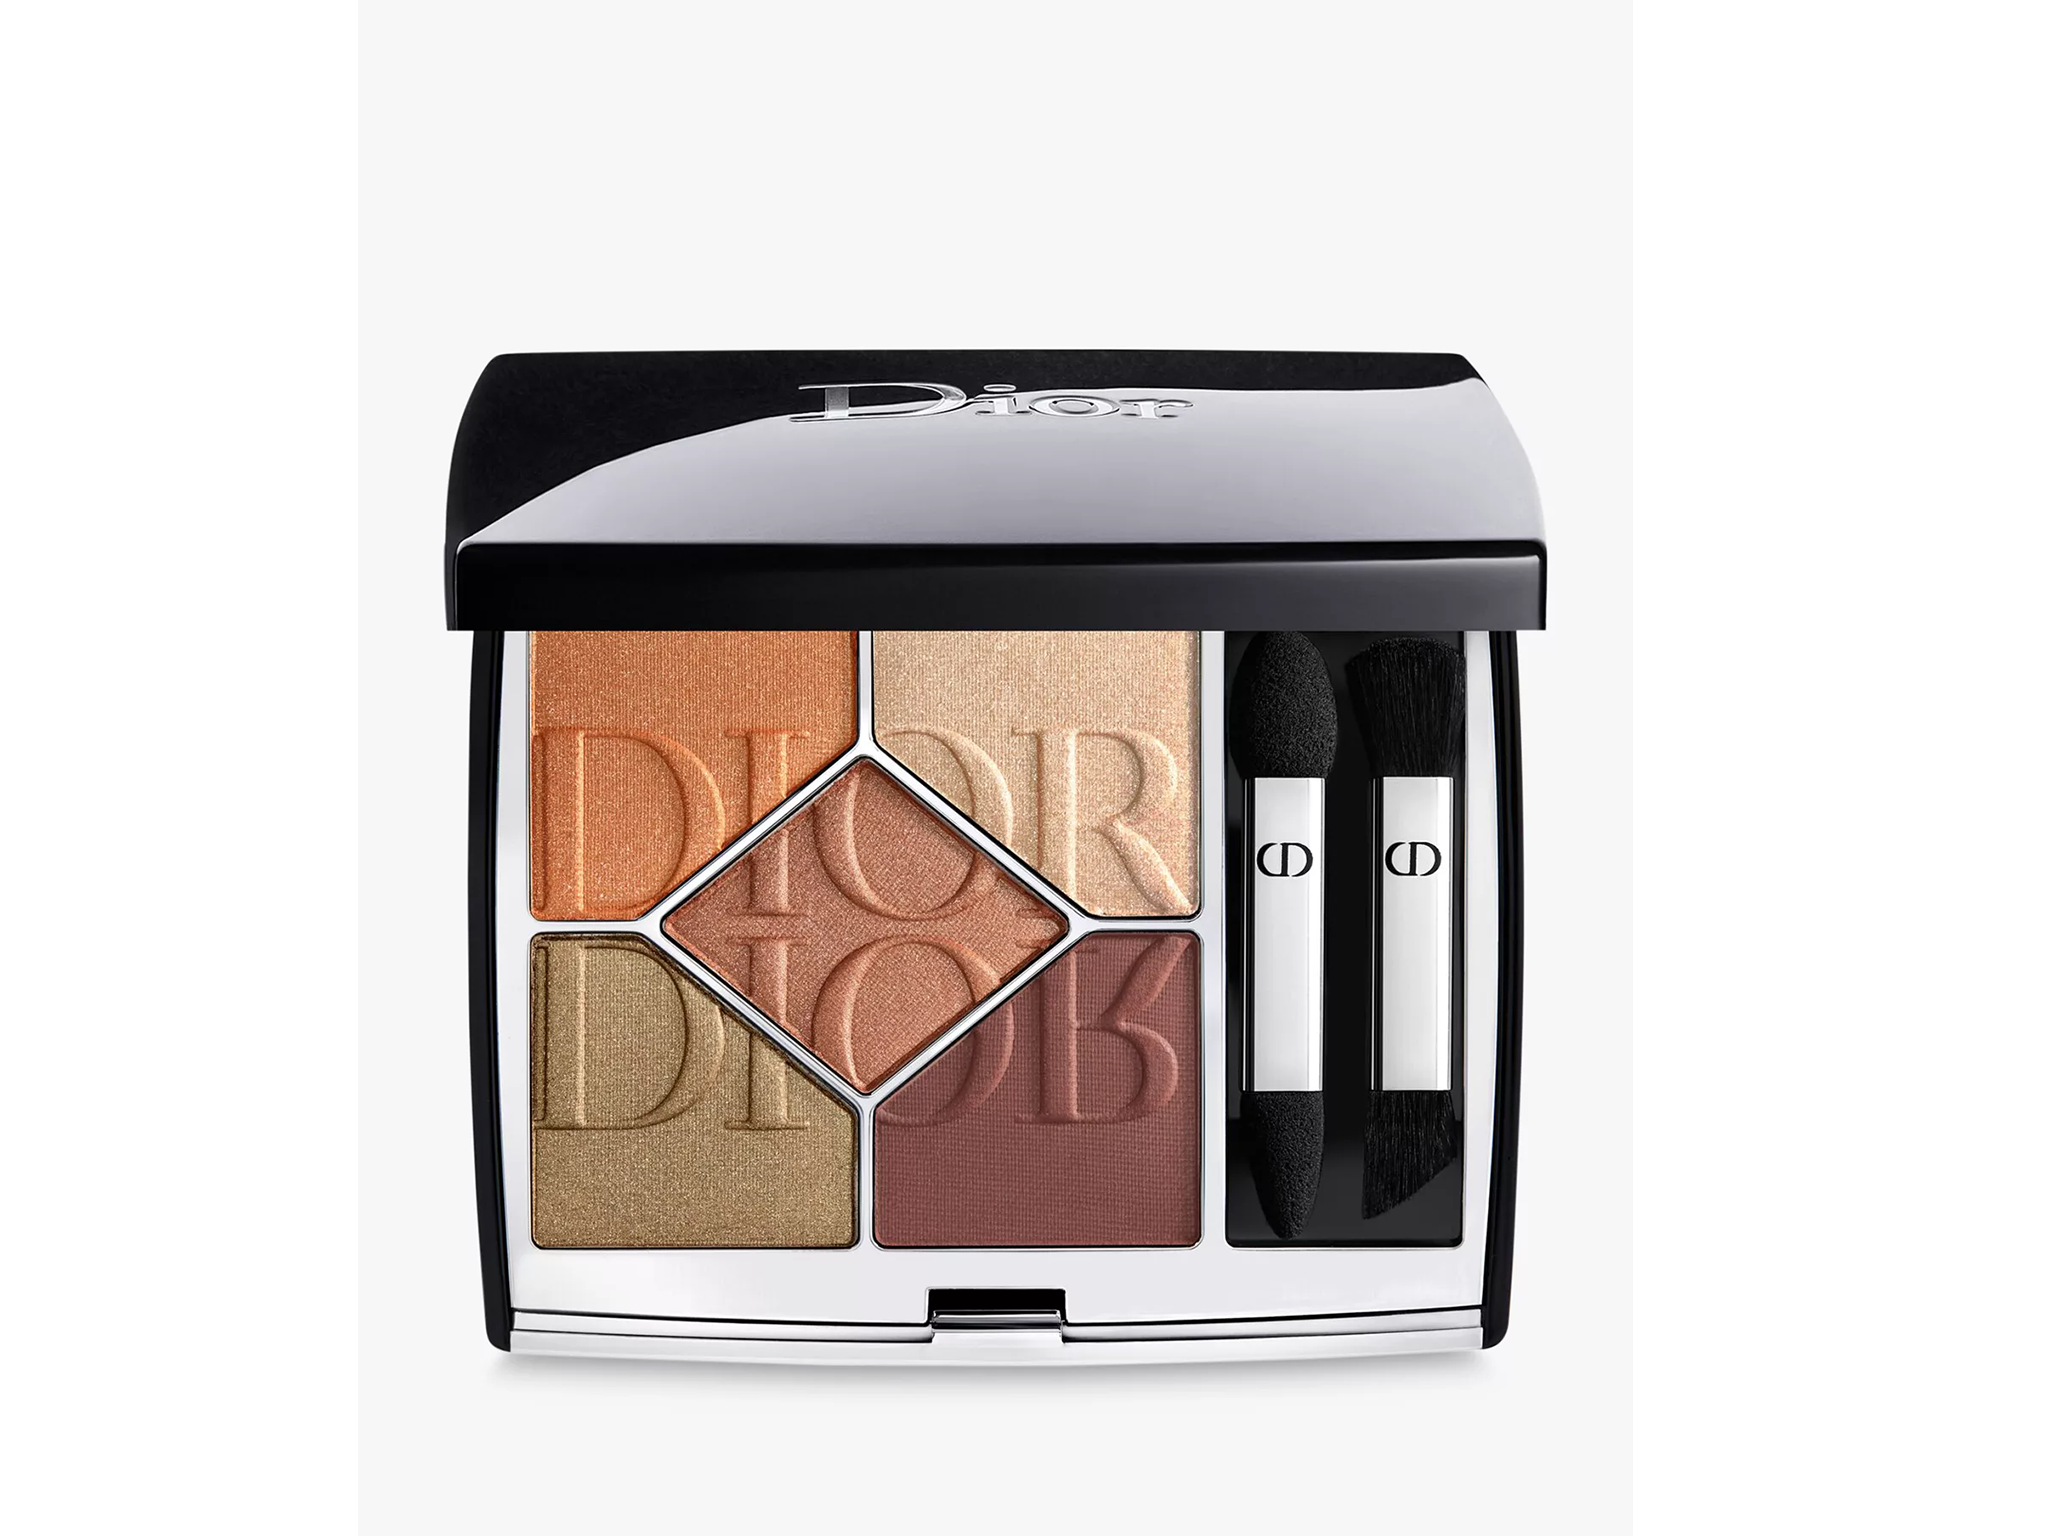 Dior 5 couleurs couture eyeshadow palette, limited edition, 659 mirror mirror